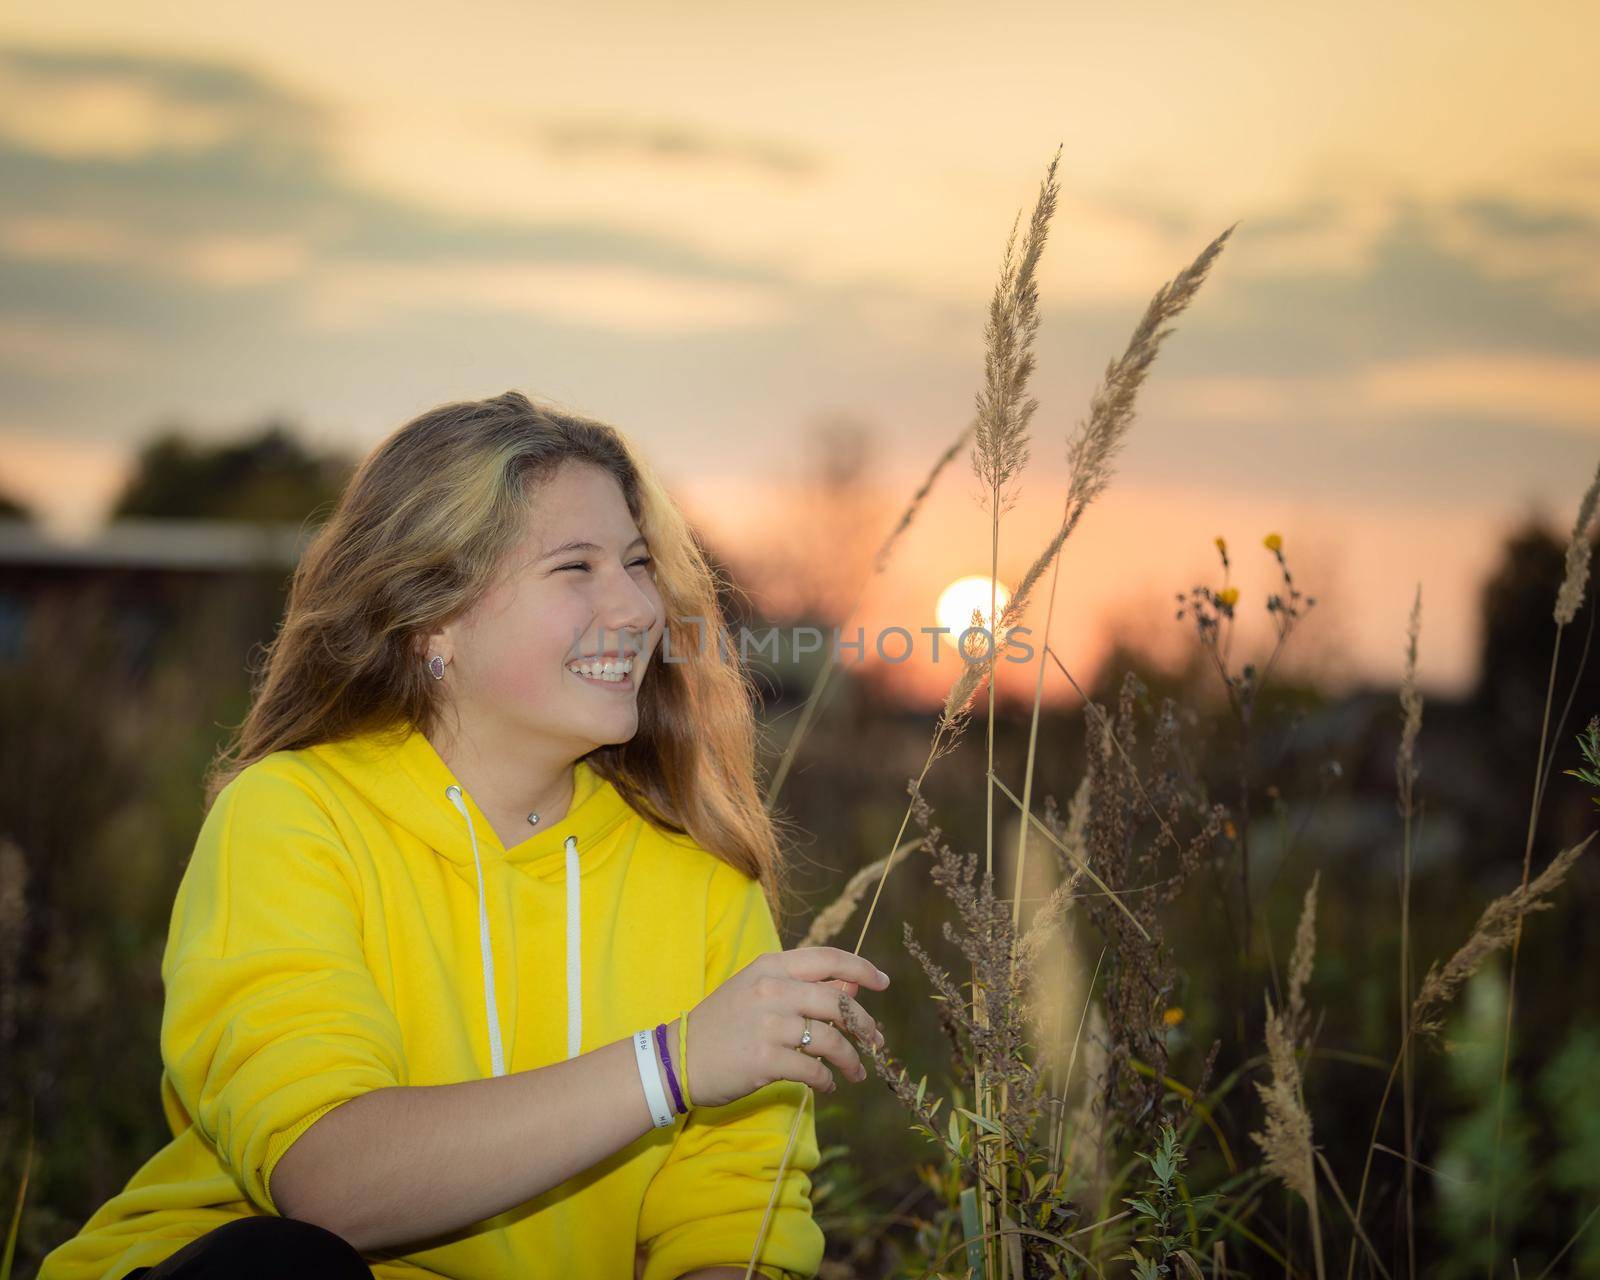 A young girl with long hair on a meadow with tall grass in the rays of the setting sun. Blonde hair. Yellow jacket.